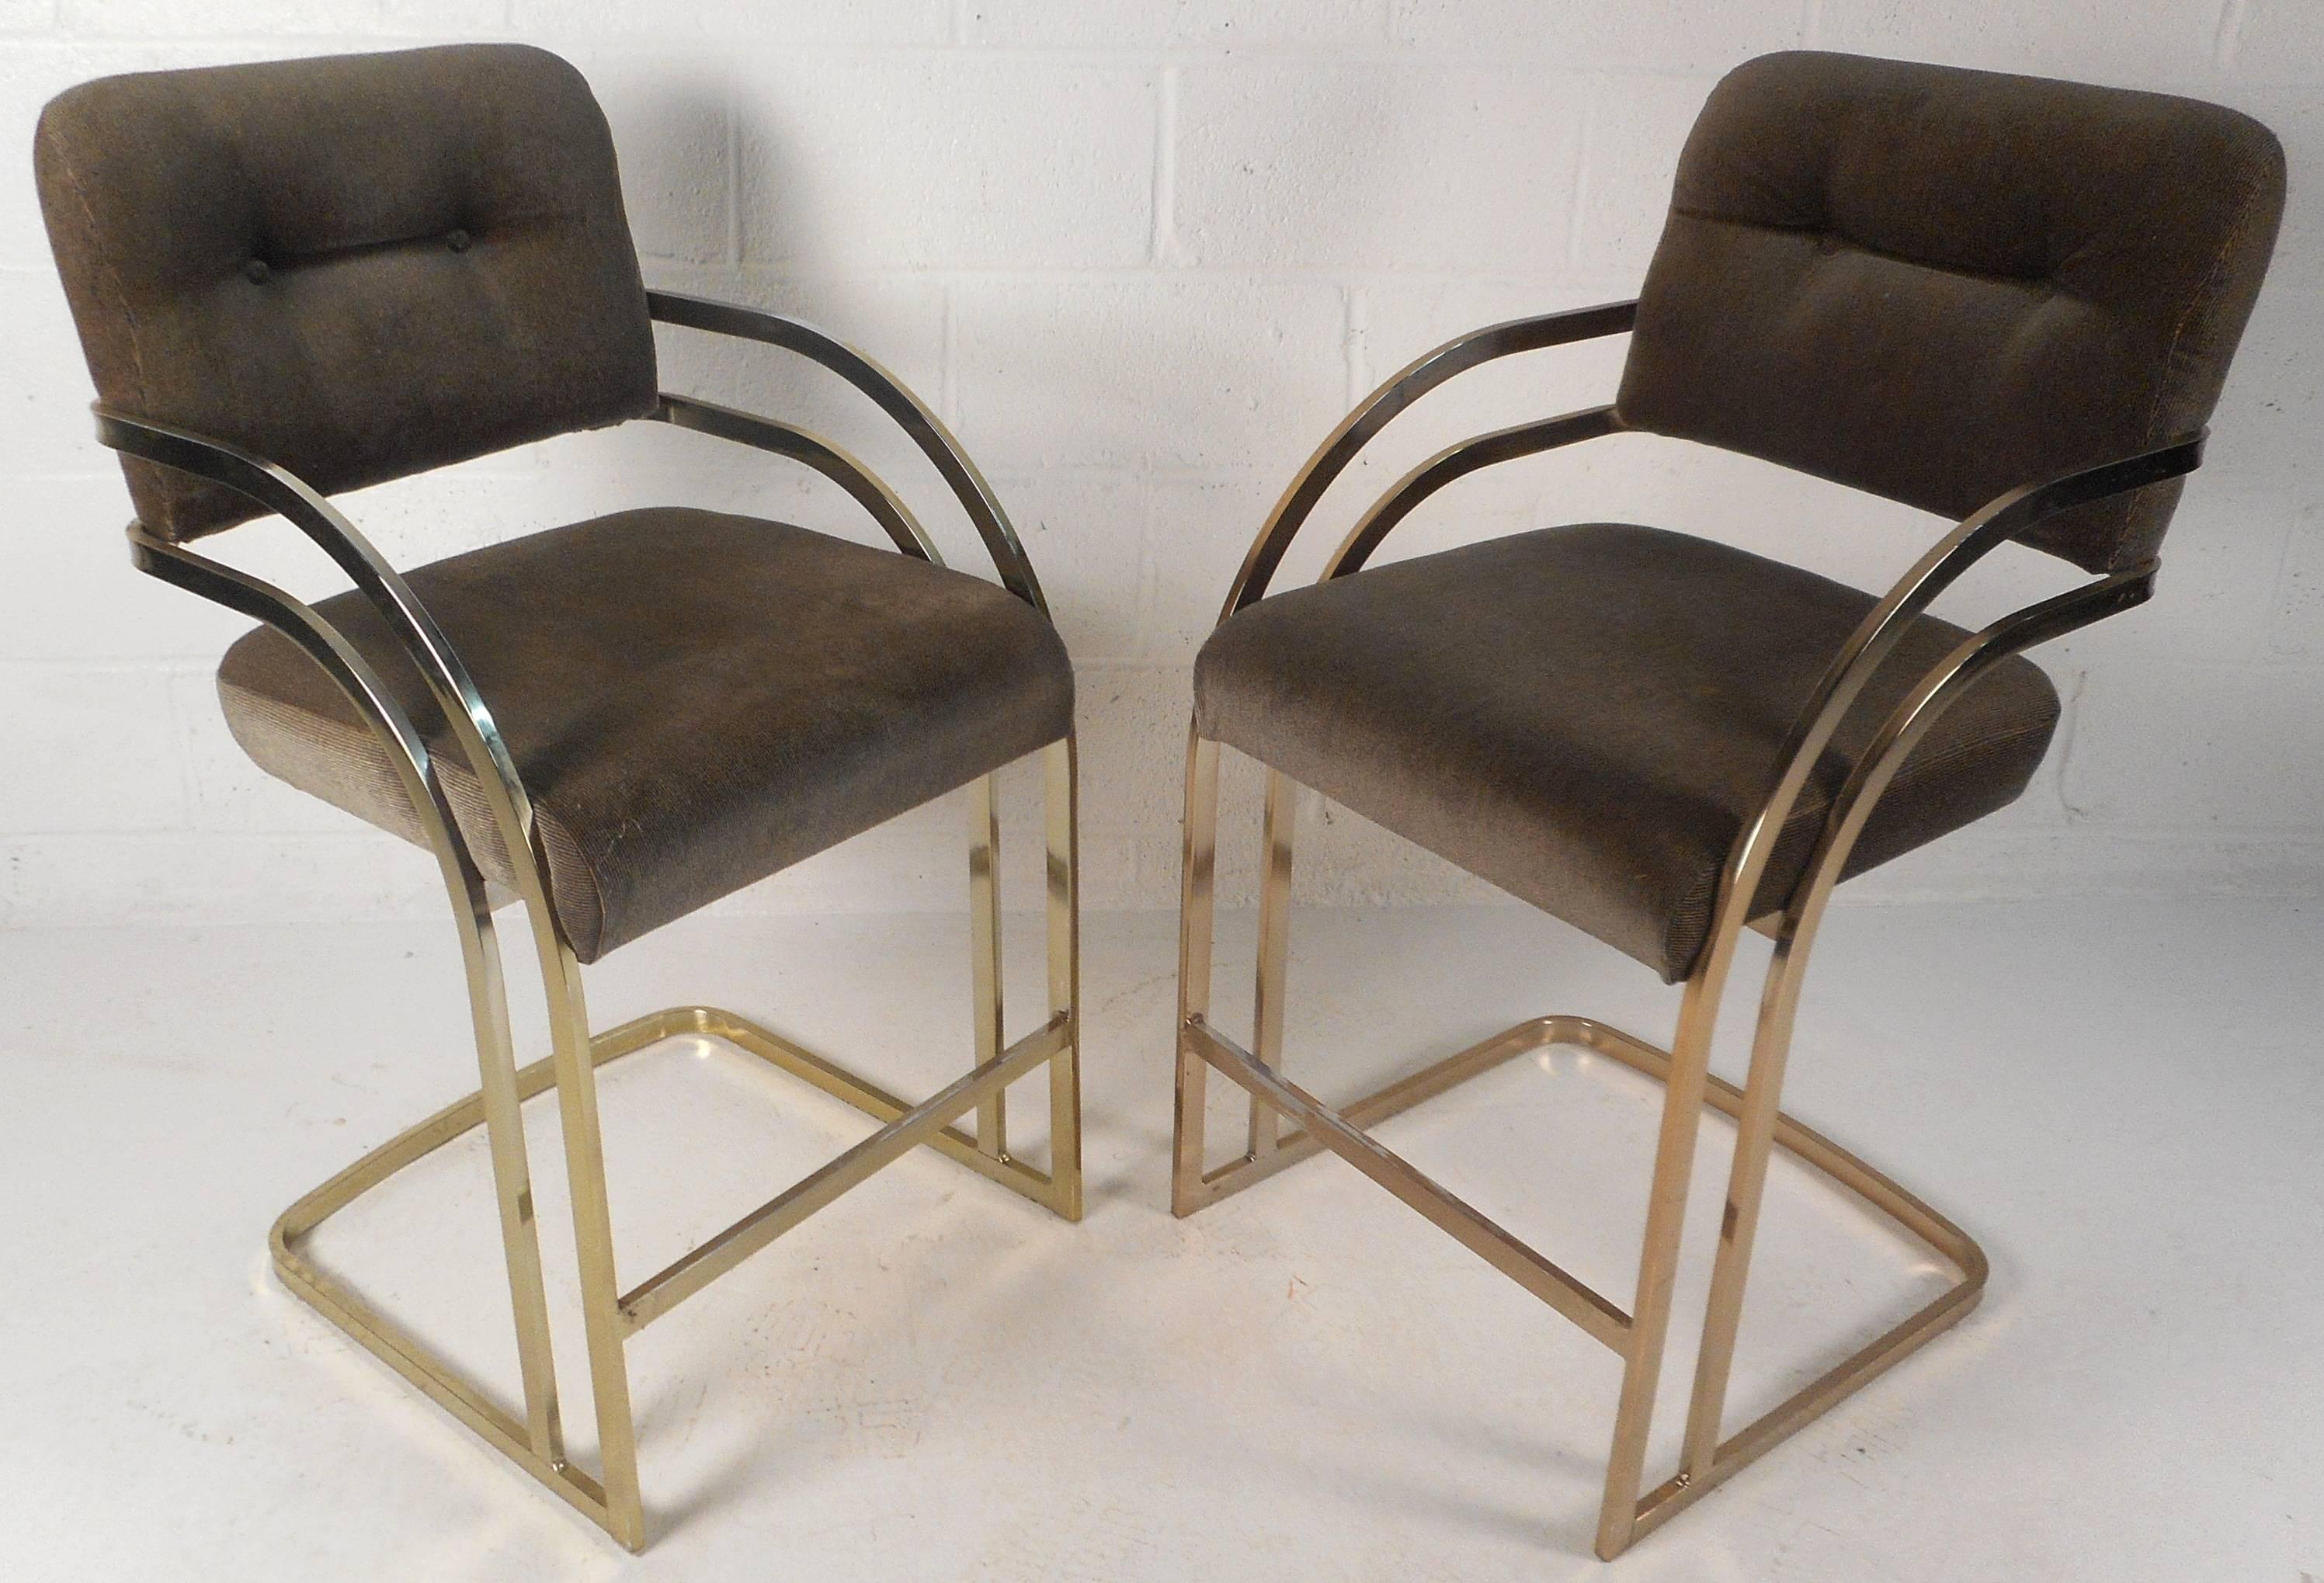 Stunning pair of vintage modern chairs feature a stylish cantilever brass plated frame with plush tufted upholstery. Unique ellipse shaped arm rests ensure optimal comfort. Double bar design provides sleek and sturdy seating that compliments any